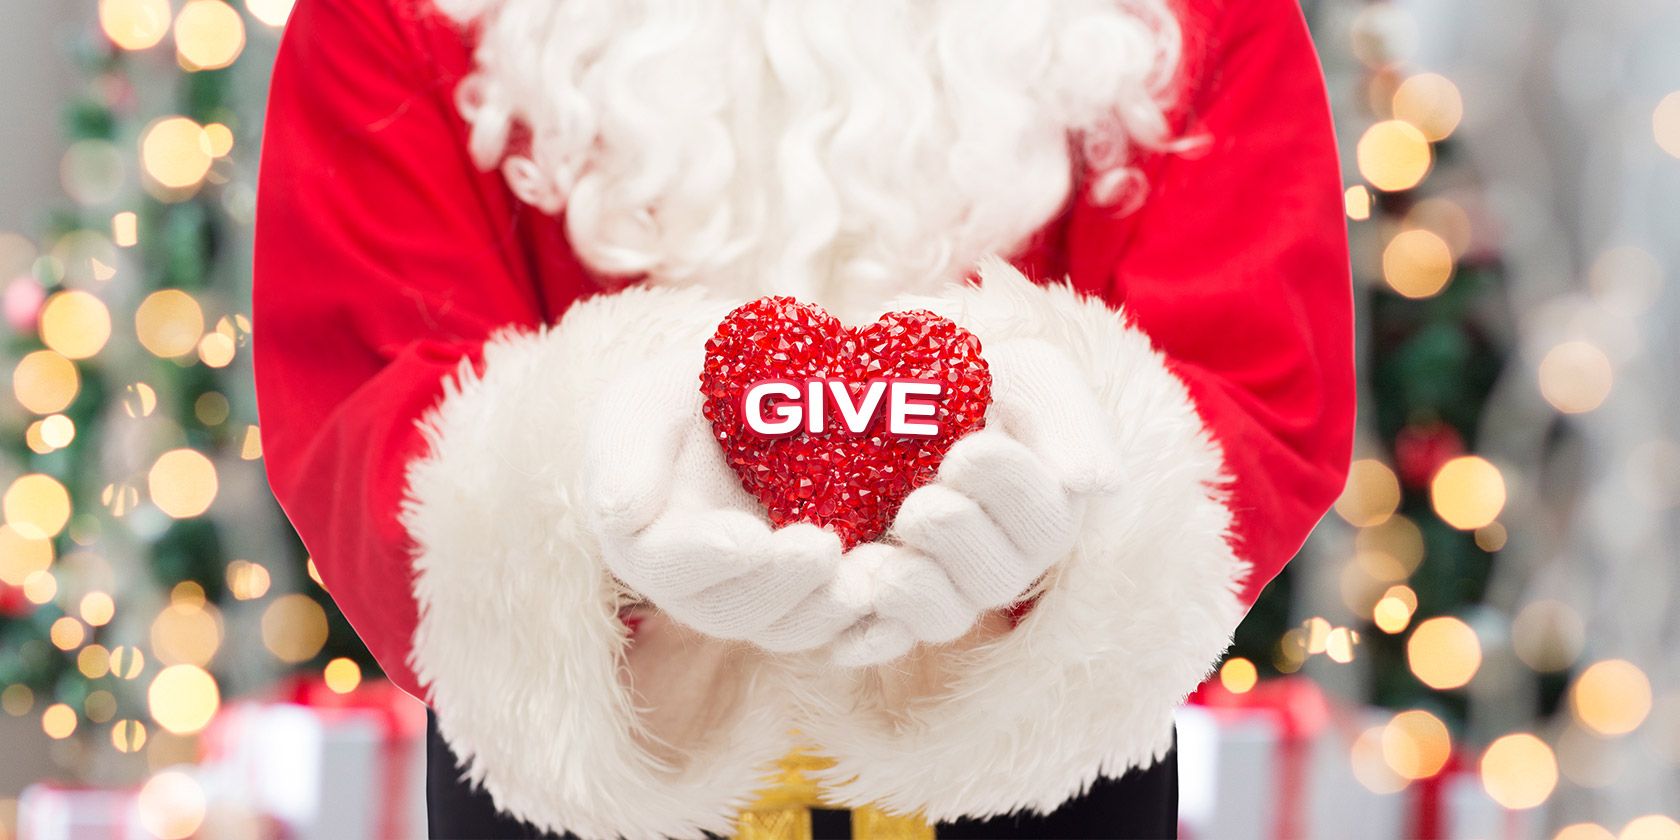 christmas charities 2020 Top 7 Christmas Charity Organizations That Help Low Income Families christmas charities 2020